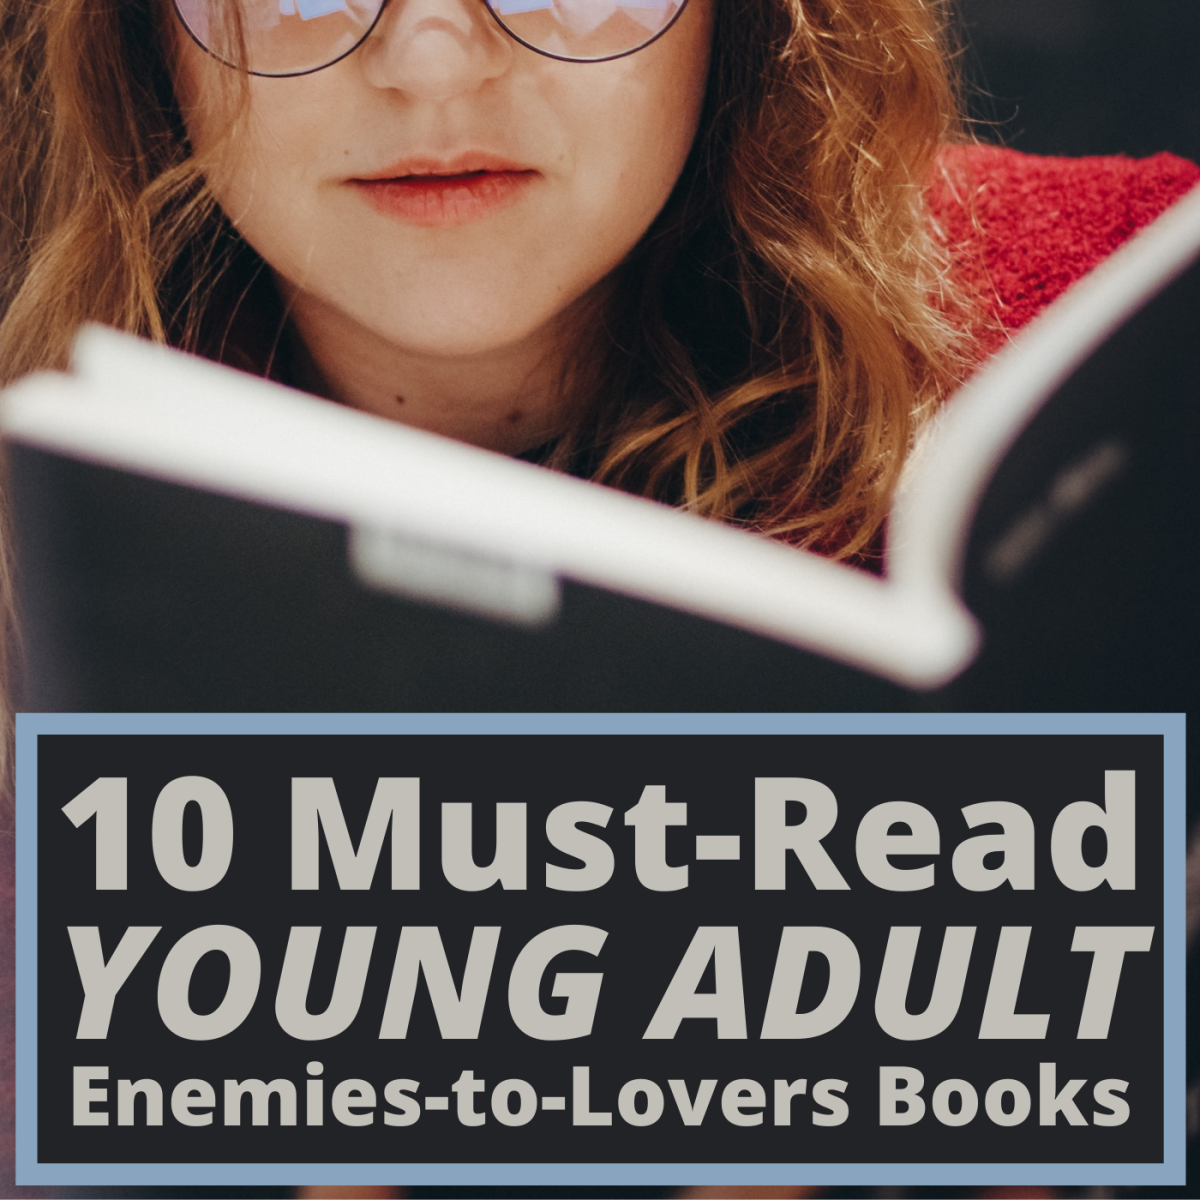 These 10 YA titles don't often appear on other enemies-to-lovers genre lists. 